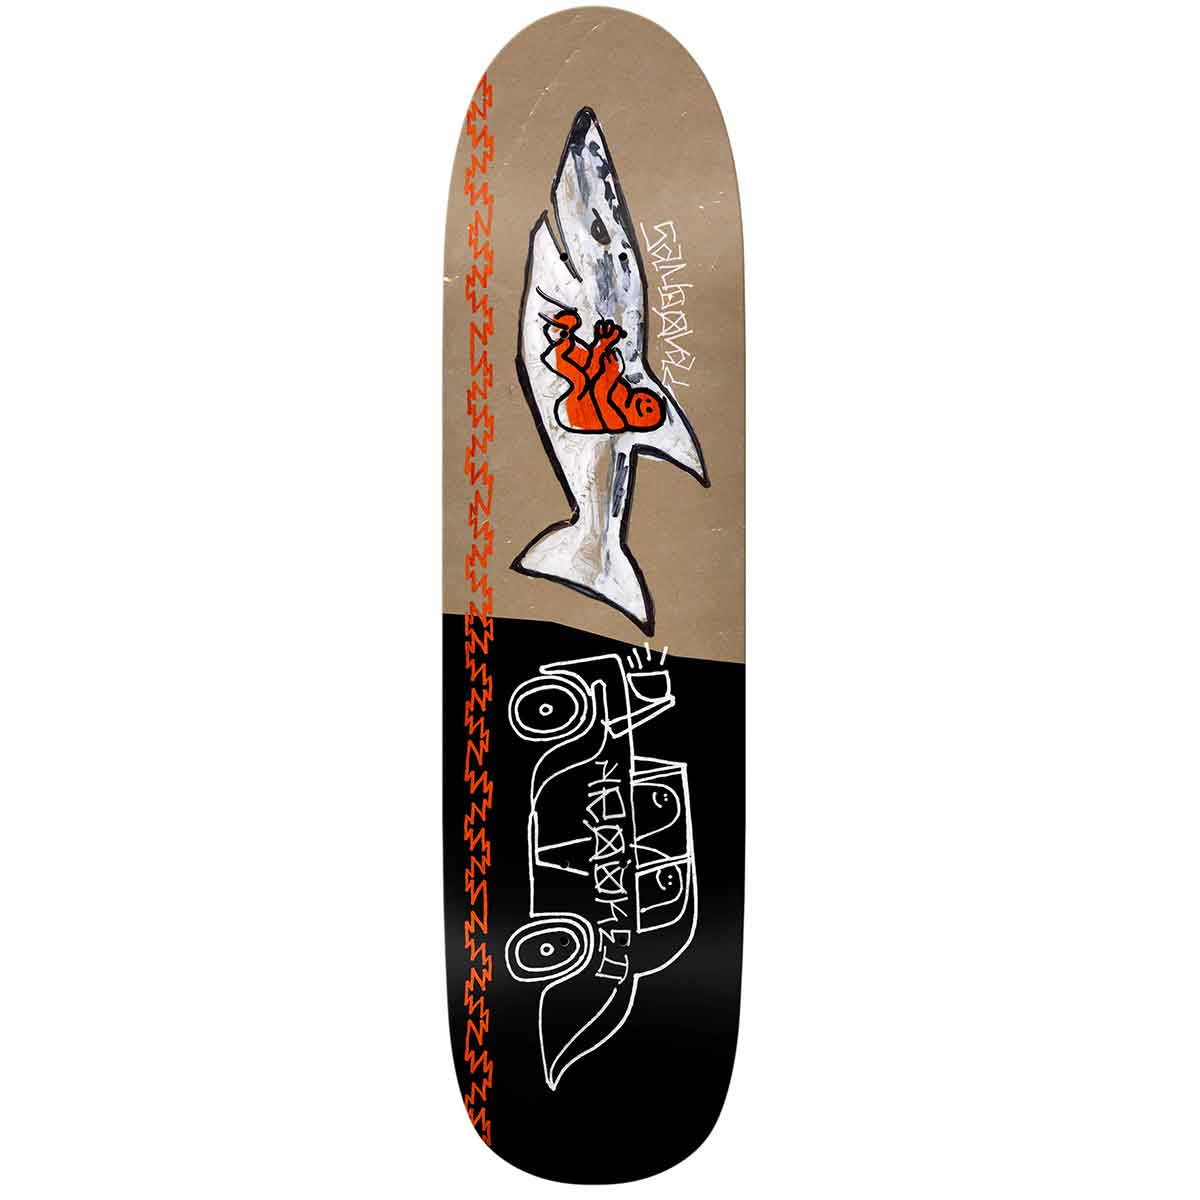 8.25x32 Krooked Ronnie Sandoval Chase Shaped Deck